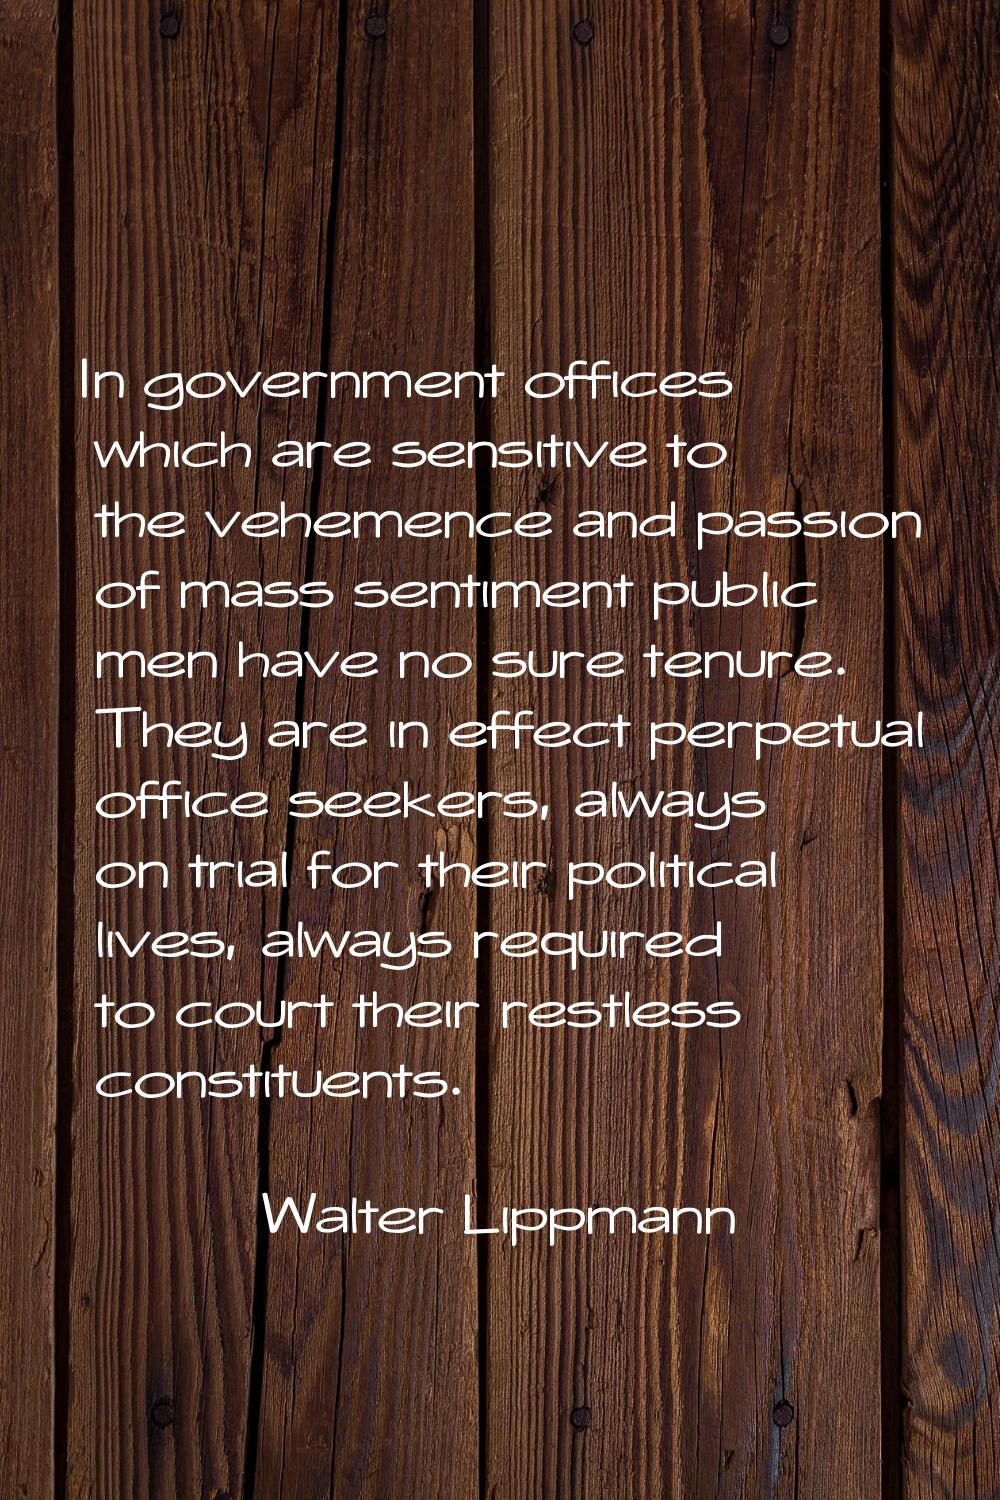 In government offices which are sensitive to the vehemence and passion of mass sentiment public men